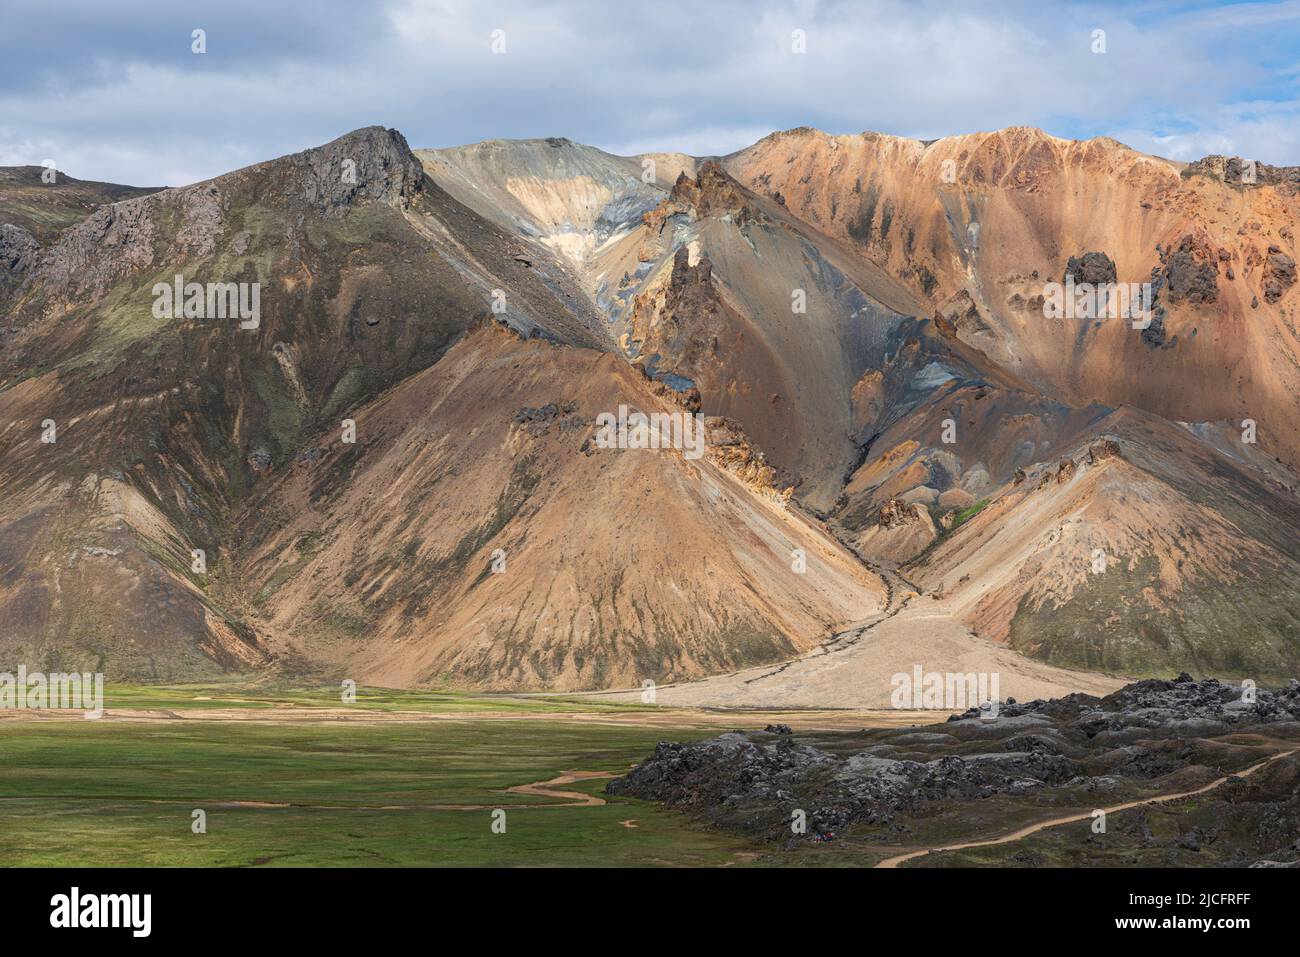 Laugavegur hiking trail is the most famous multi-day trekking tour in Iceland. Landscape photo from the area around Landmannalaugar, starting point of the long-distance hiking trail in the highlands of Iceland near the volcano Hekla. Stock Photo